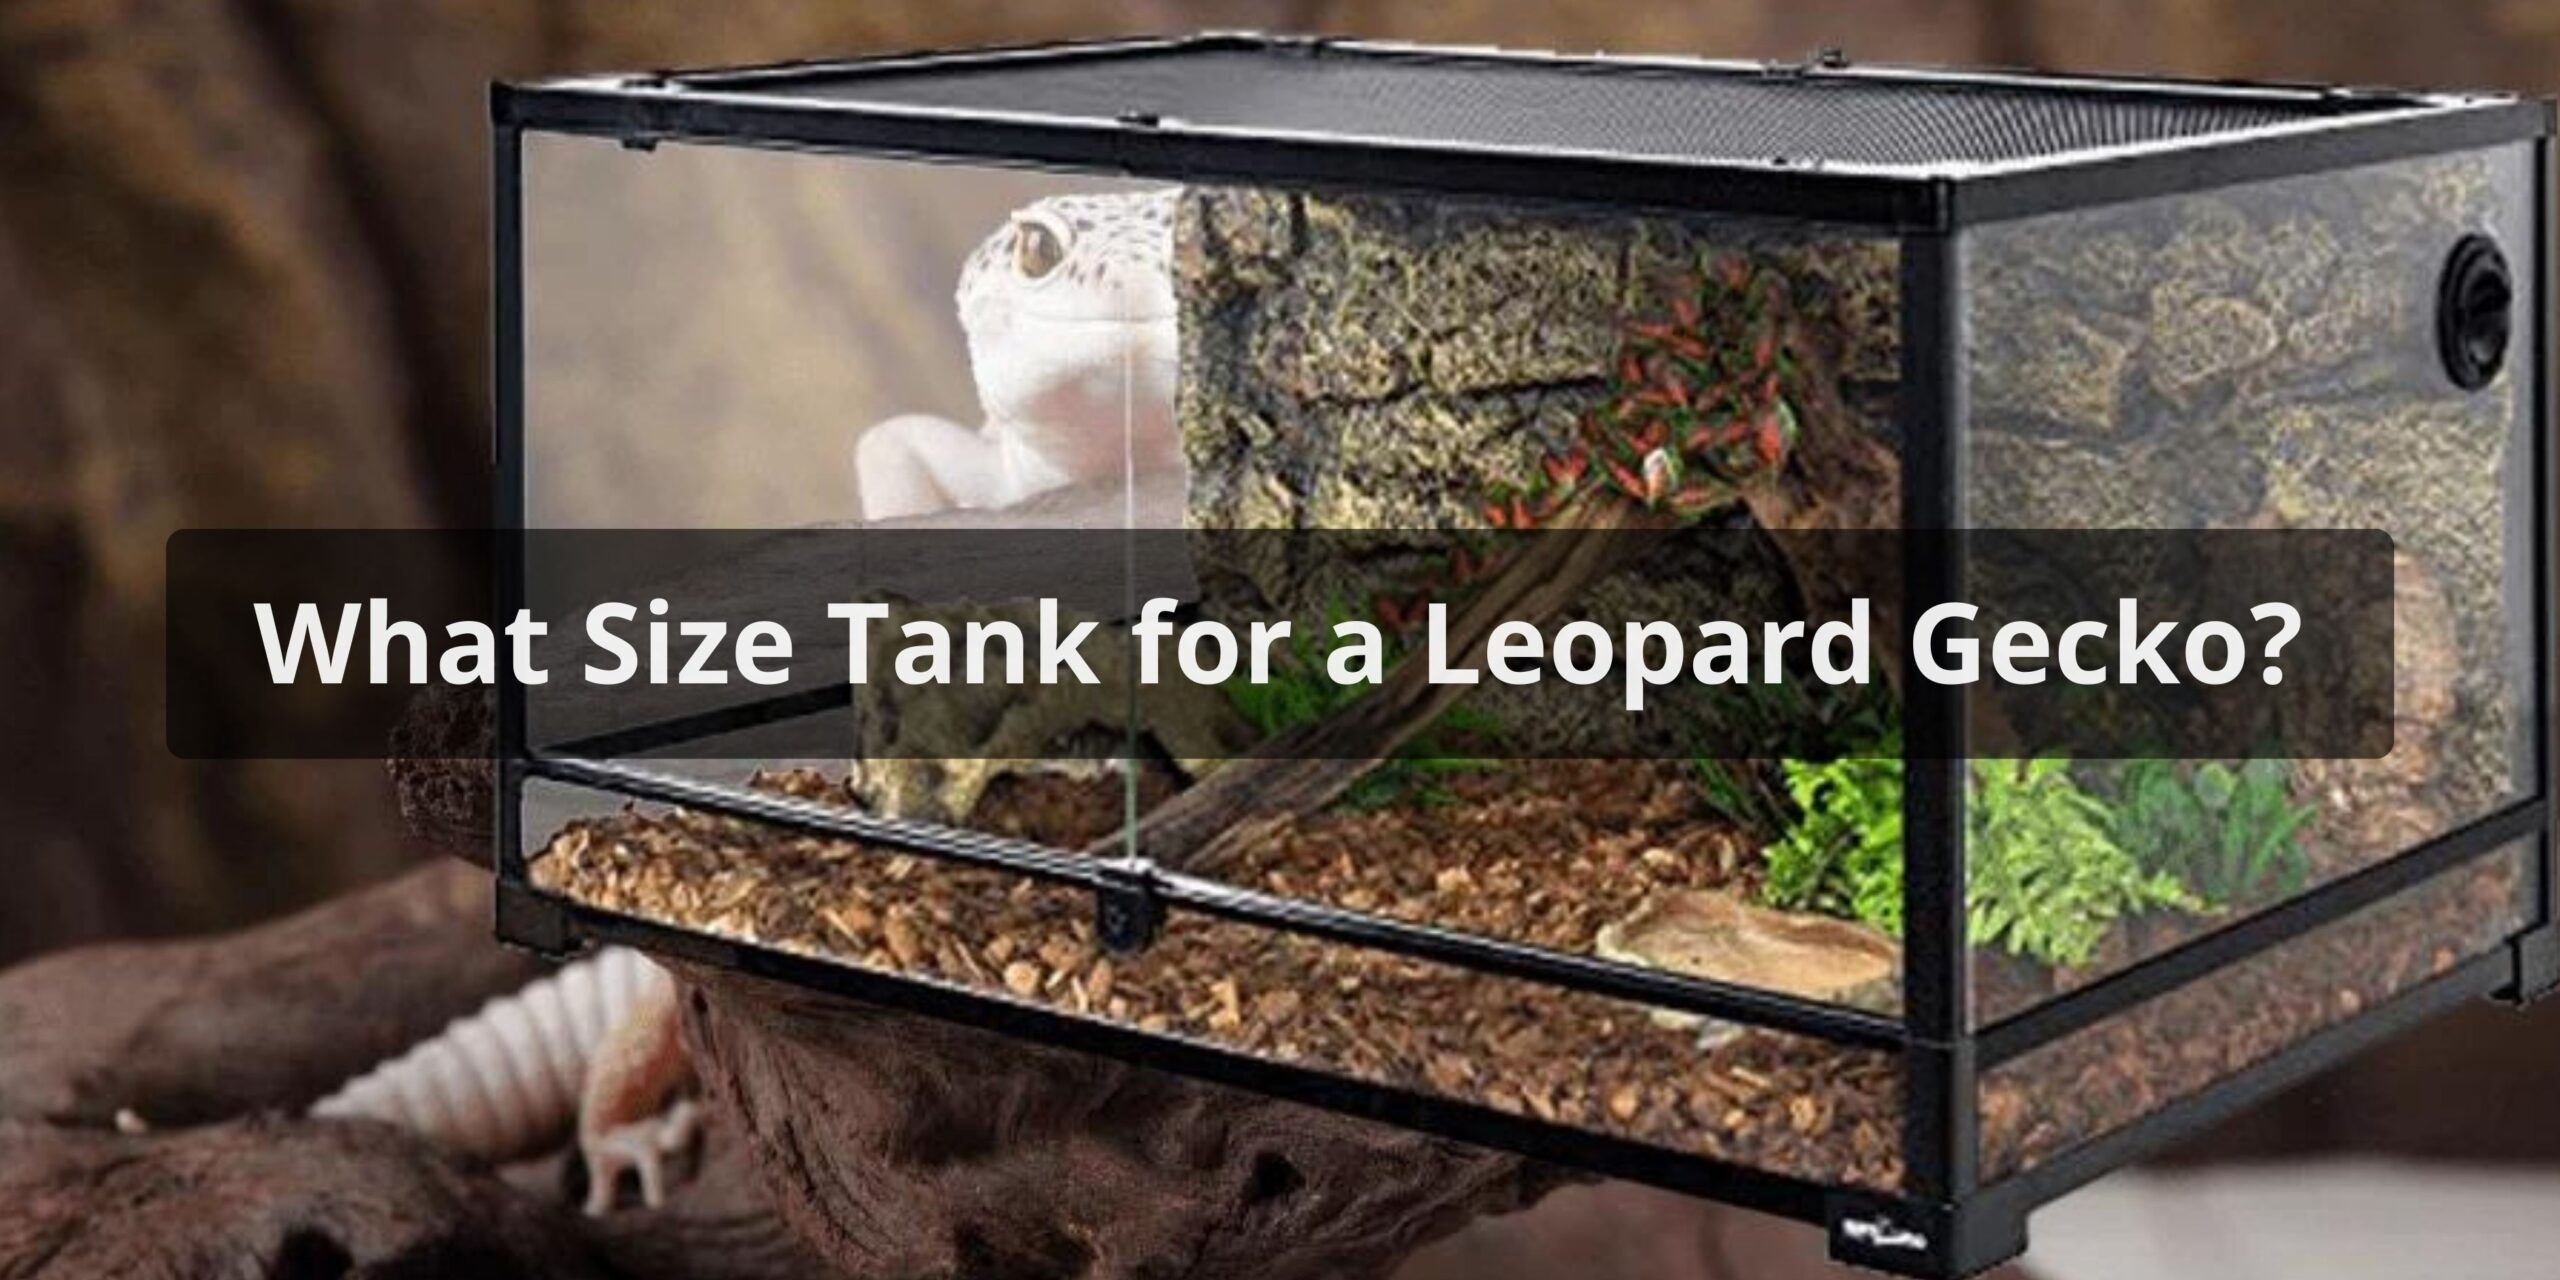 What Size Tank for a Leopard Gecko